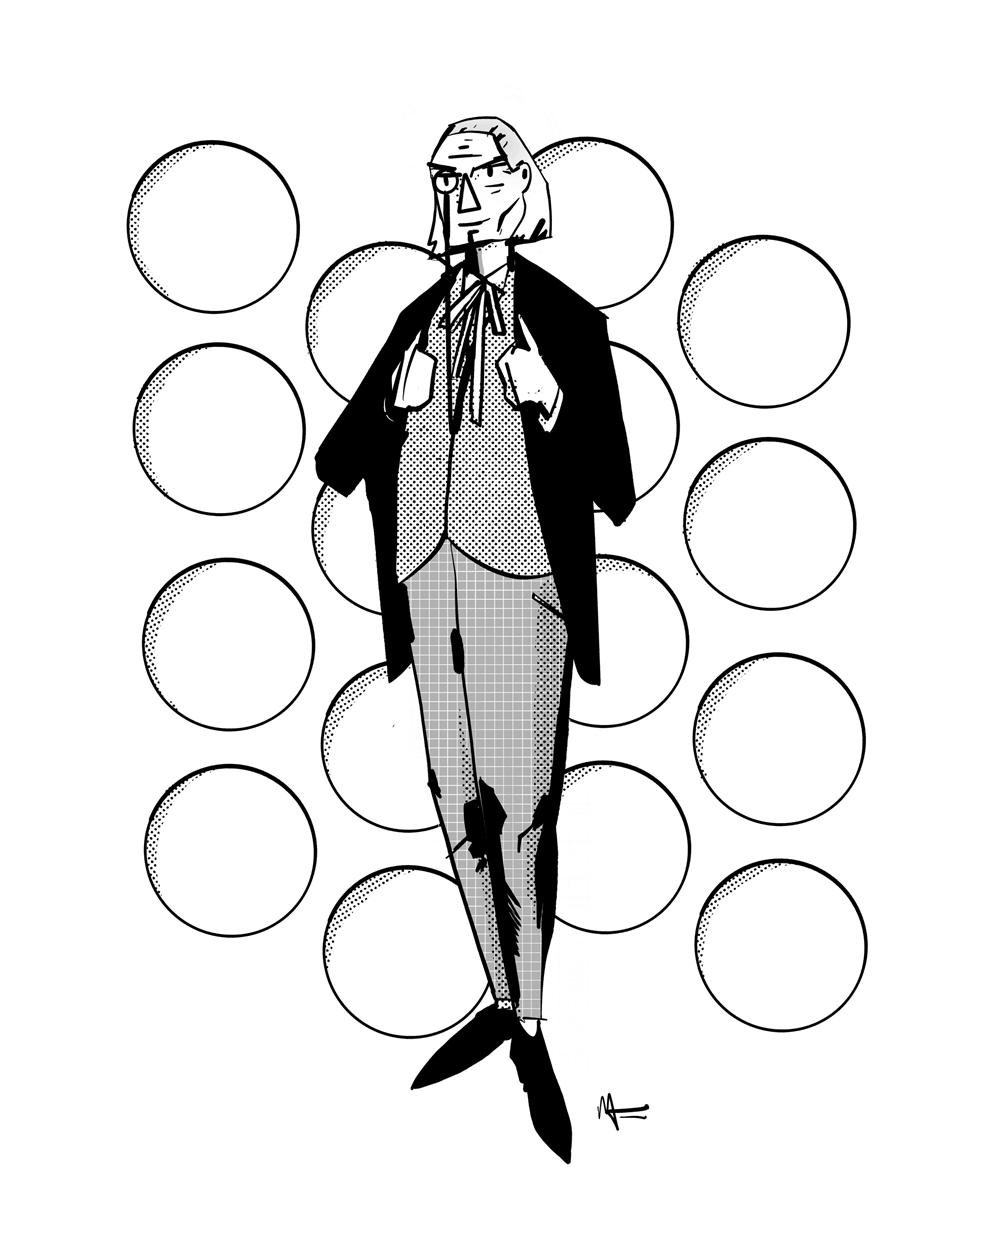 The First Doctor Who, wearing a black jacket, plaid pants, and a monocole. He is holding his lapels.